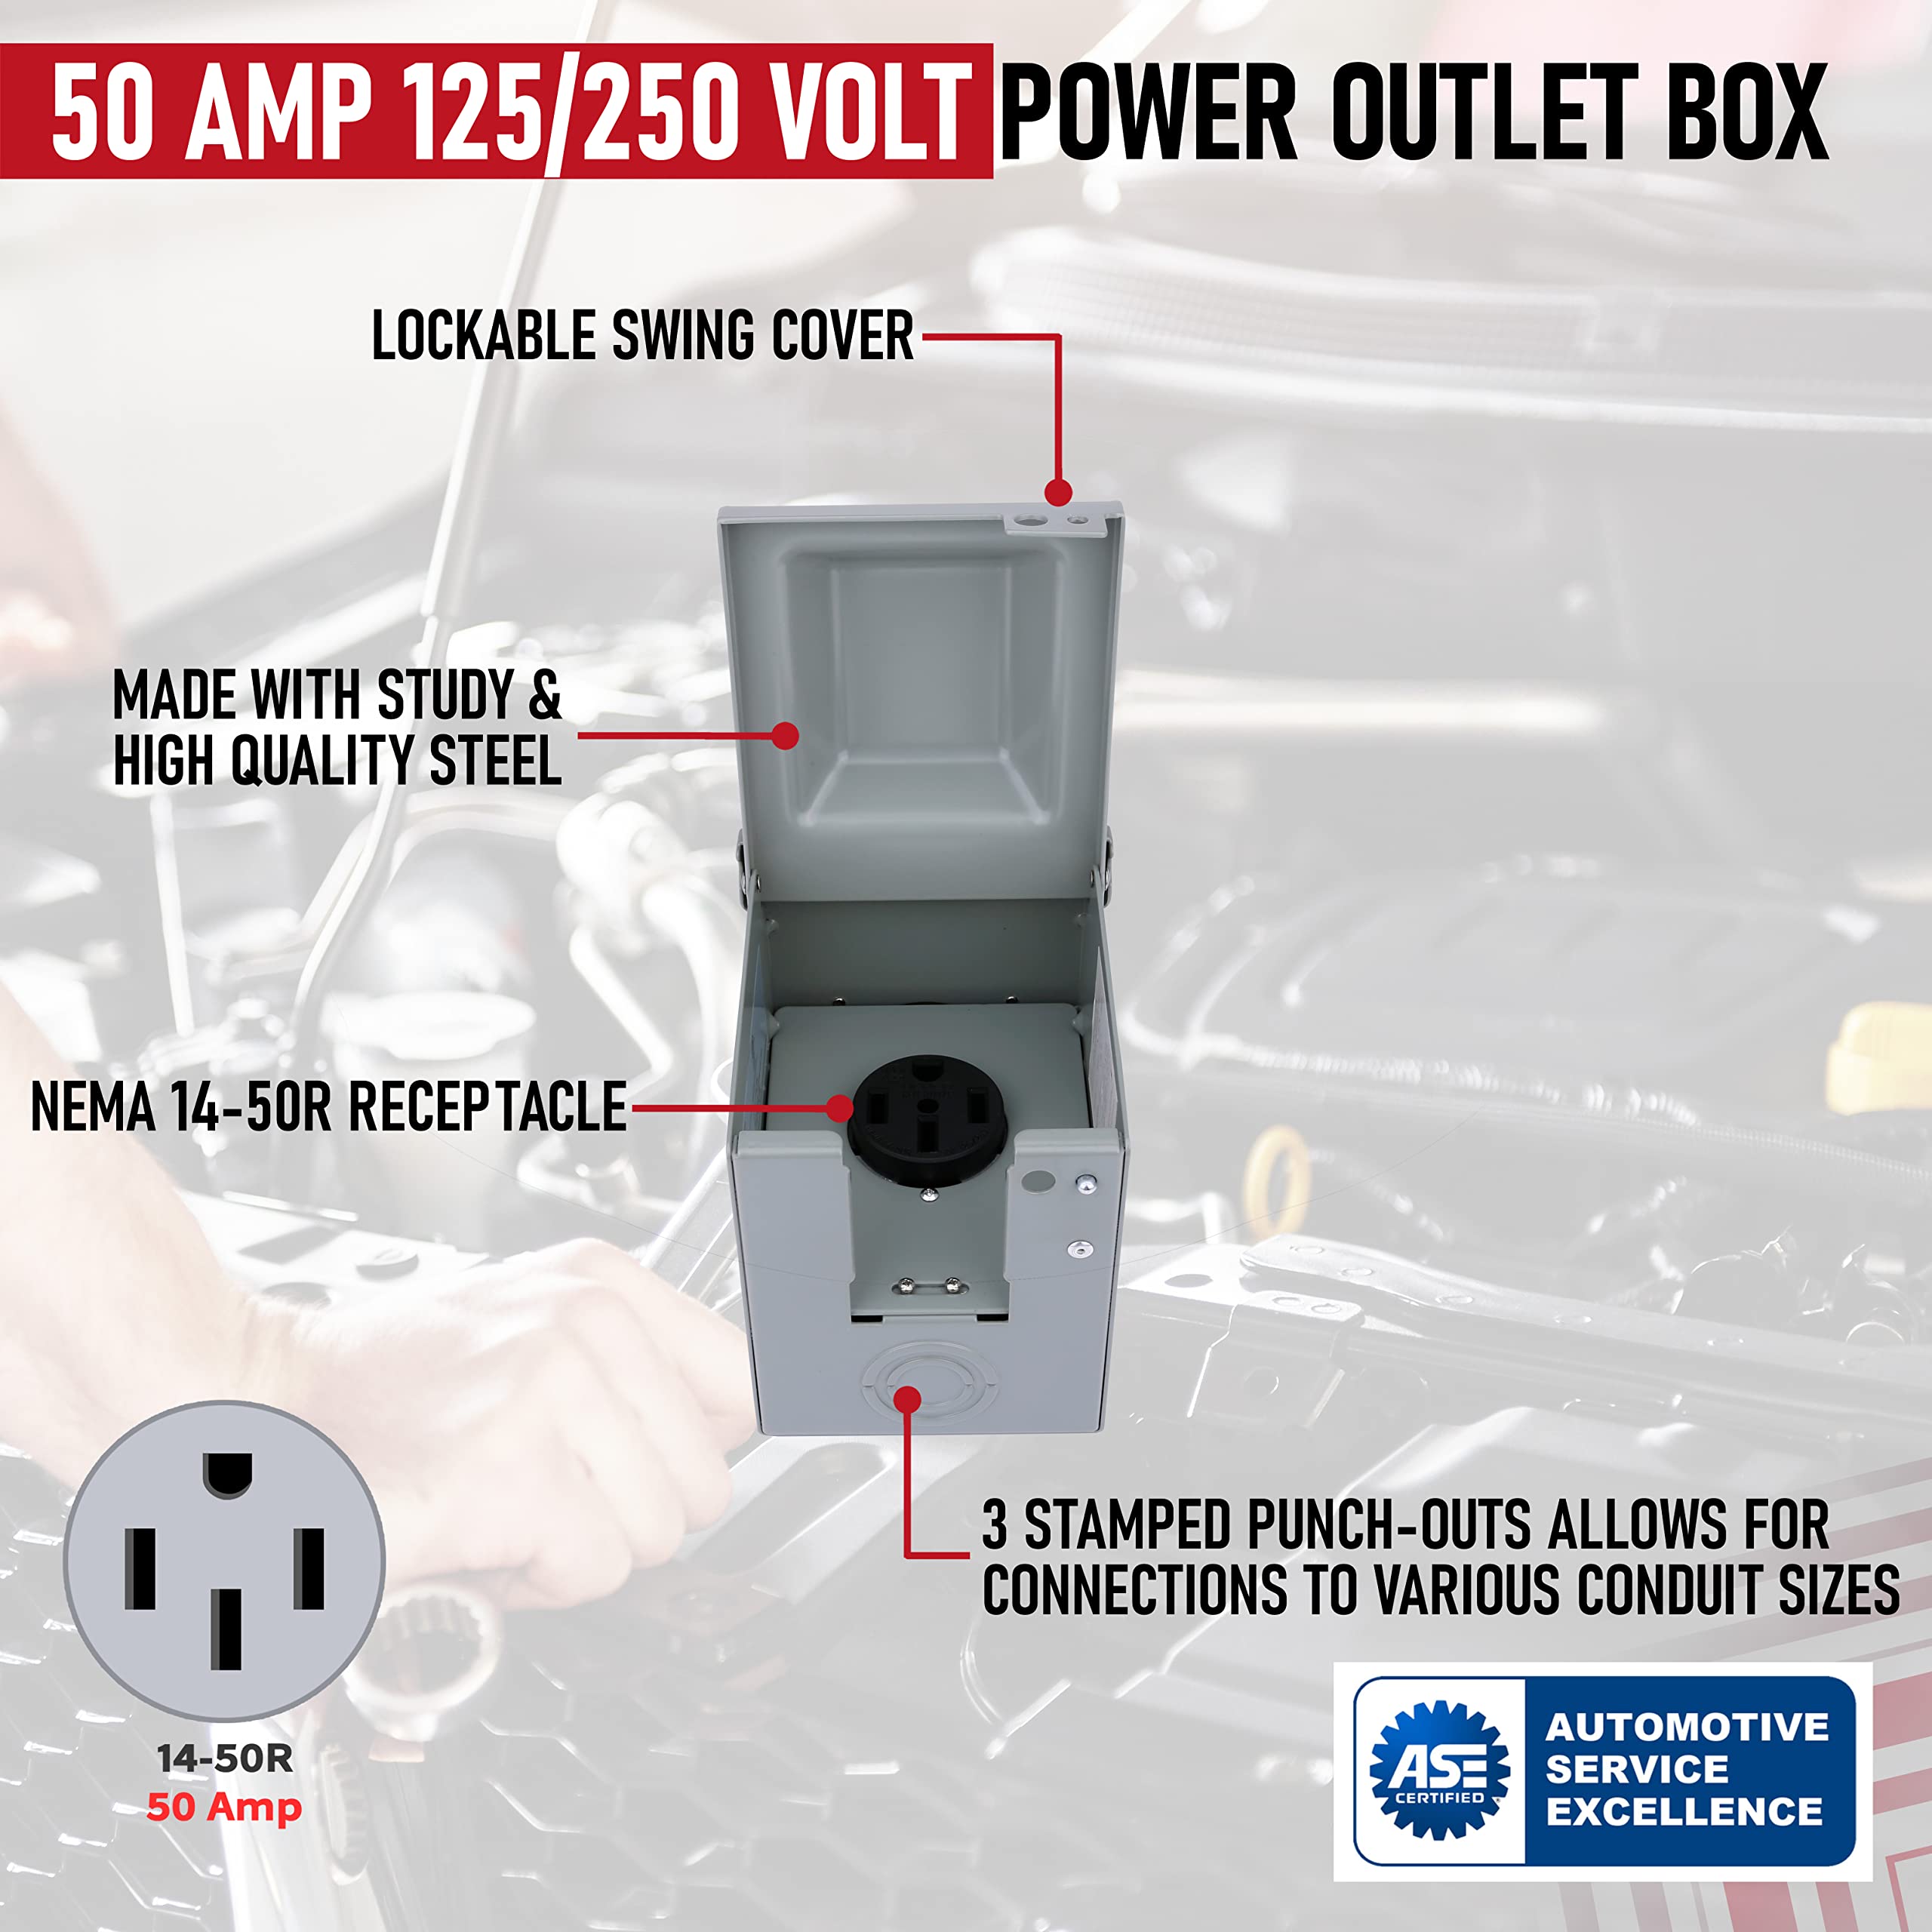 50 Amp 125/250 Volt Power Outlet Box, Enclosed Lockable - for RV, Campers, Motorhome, Travel Trailer, Electric Cars, Generator - 3R Weatherproof Outdoor - NEMA 14-50R Receptacle Panel  - Very Good